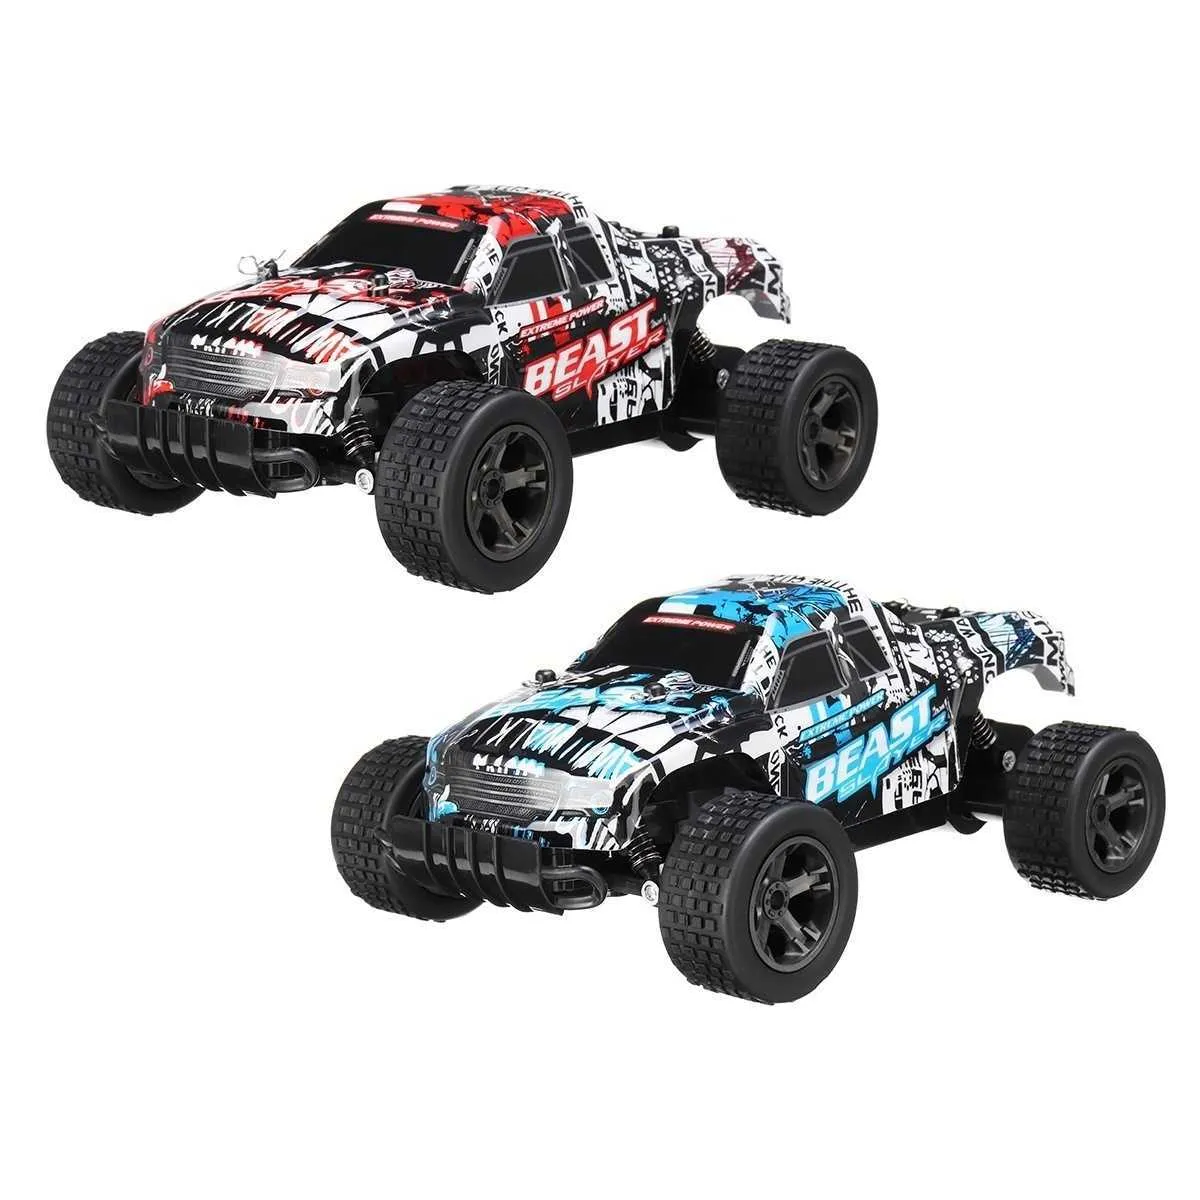 High Speed Racing Car 48KM/H 2.4ghz 1:20 Remote Control Car RC Electric Monster Off Road Vehicle Boys Baby Toys Q0726